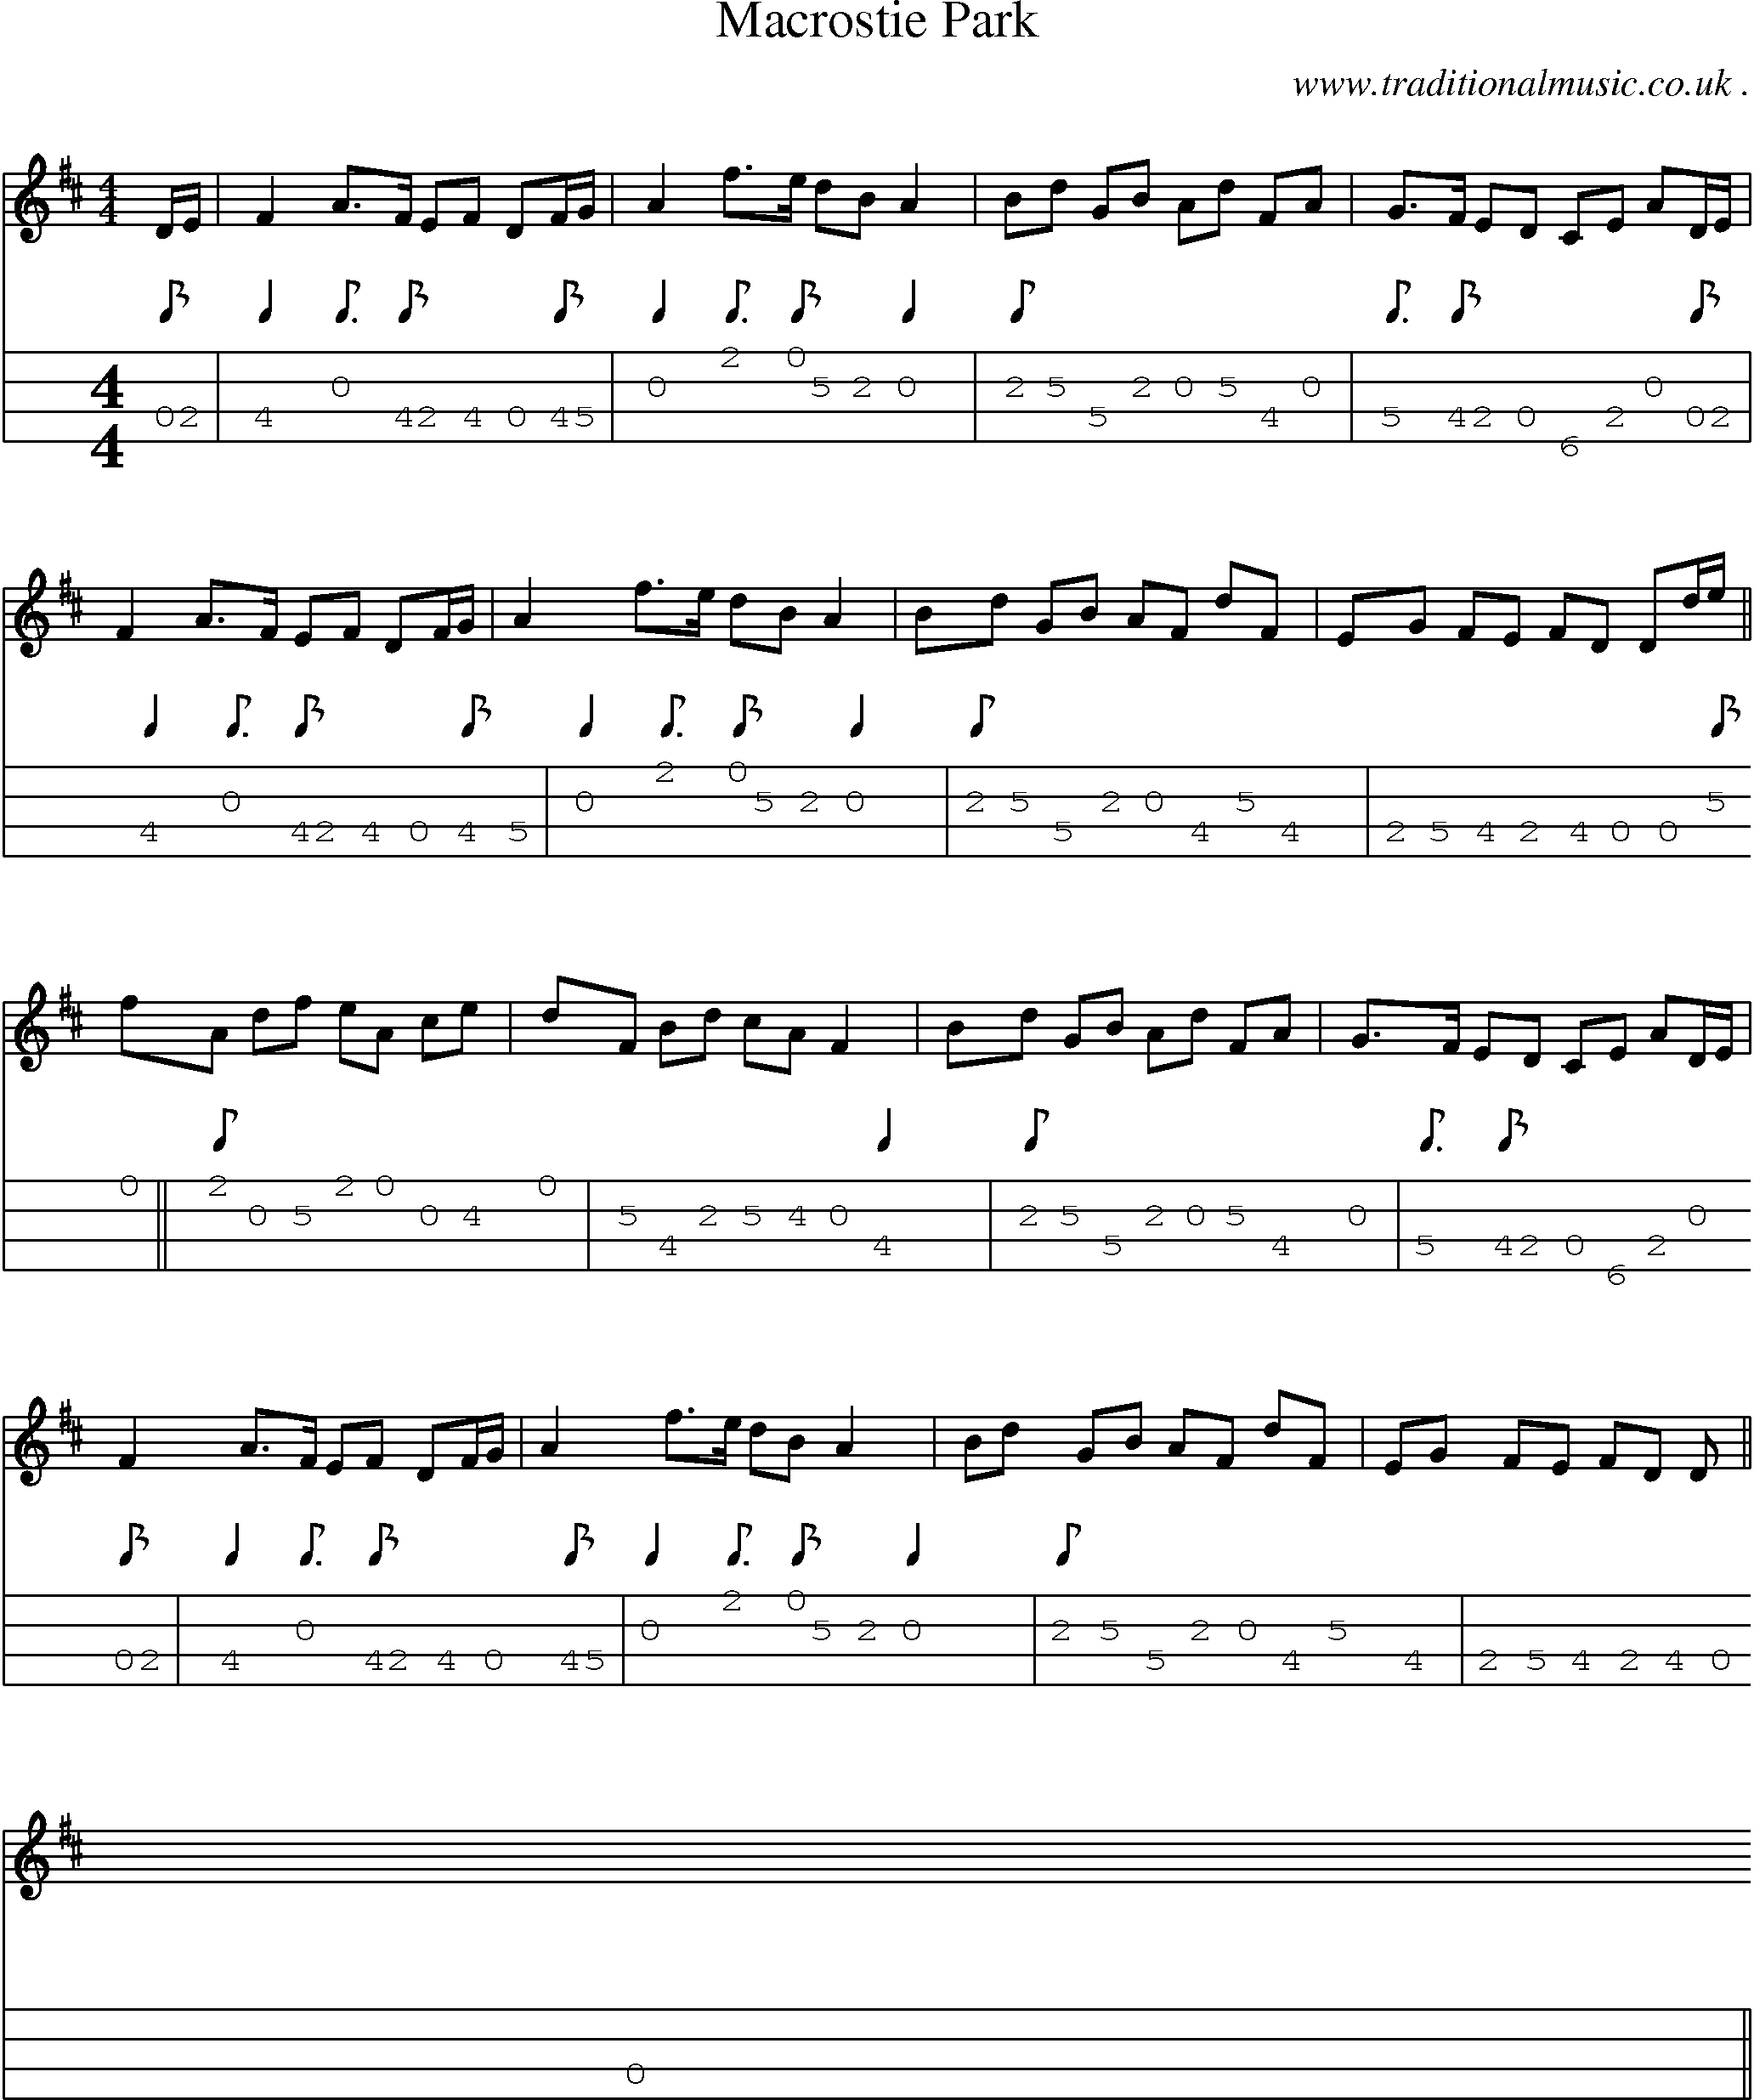 Sheet-music  score, Chords and Mandolin Tabs for Macrostie Park